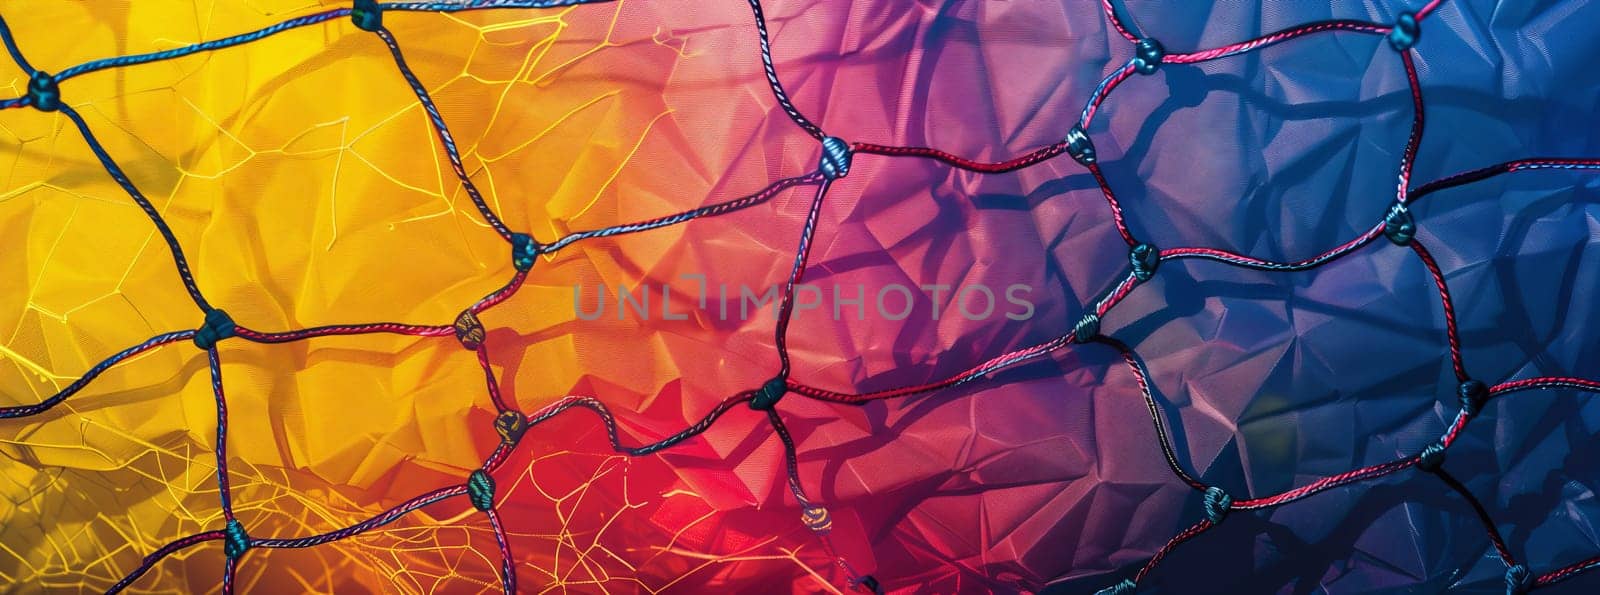 Close up of a soccer net painted with a vibrant rainbow pattern by richwolf